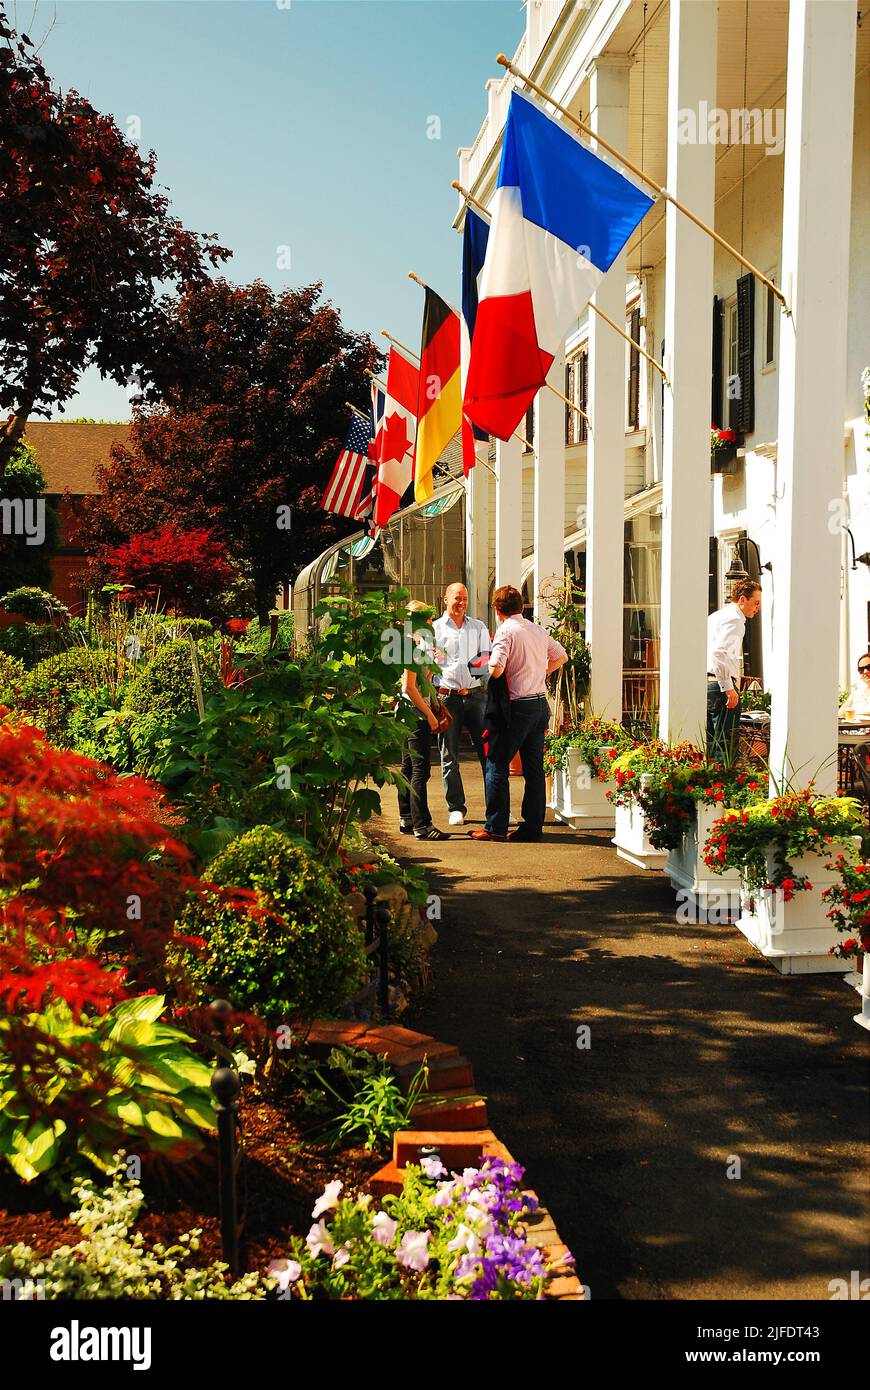 People talk under the flags of several nations in front of the Beakman Arms Inn, said to be the oldest inn in America, near Rhinebeck, New York Stock Photo